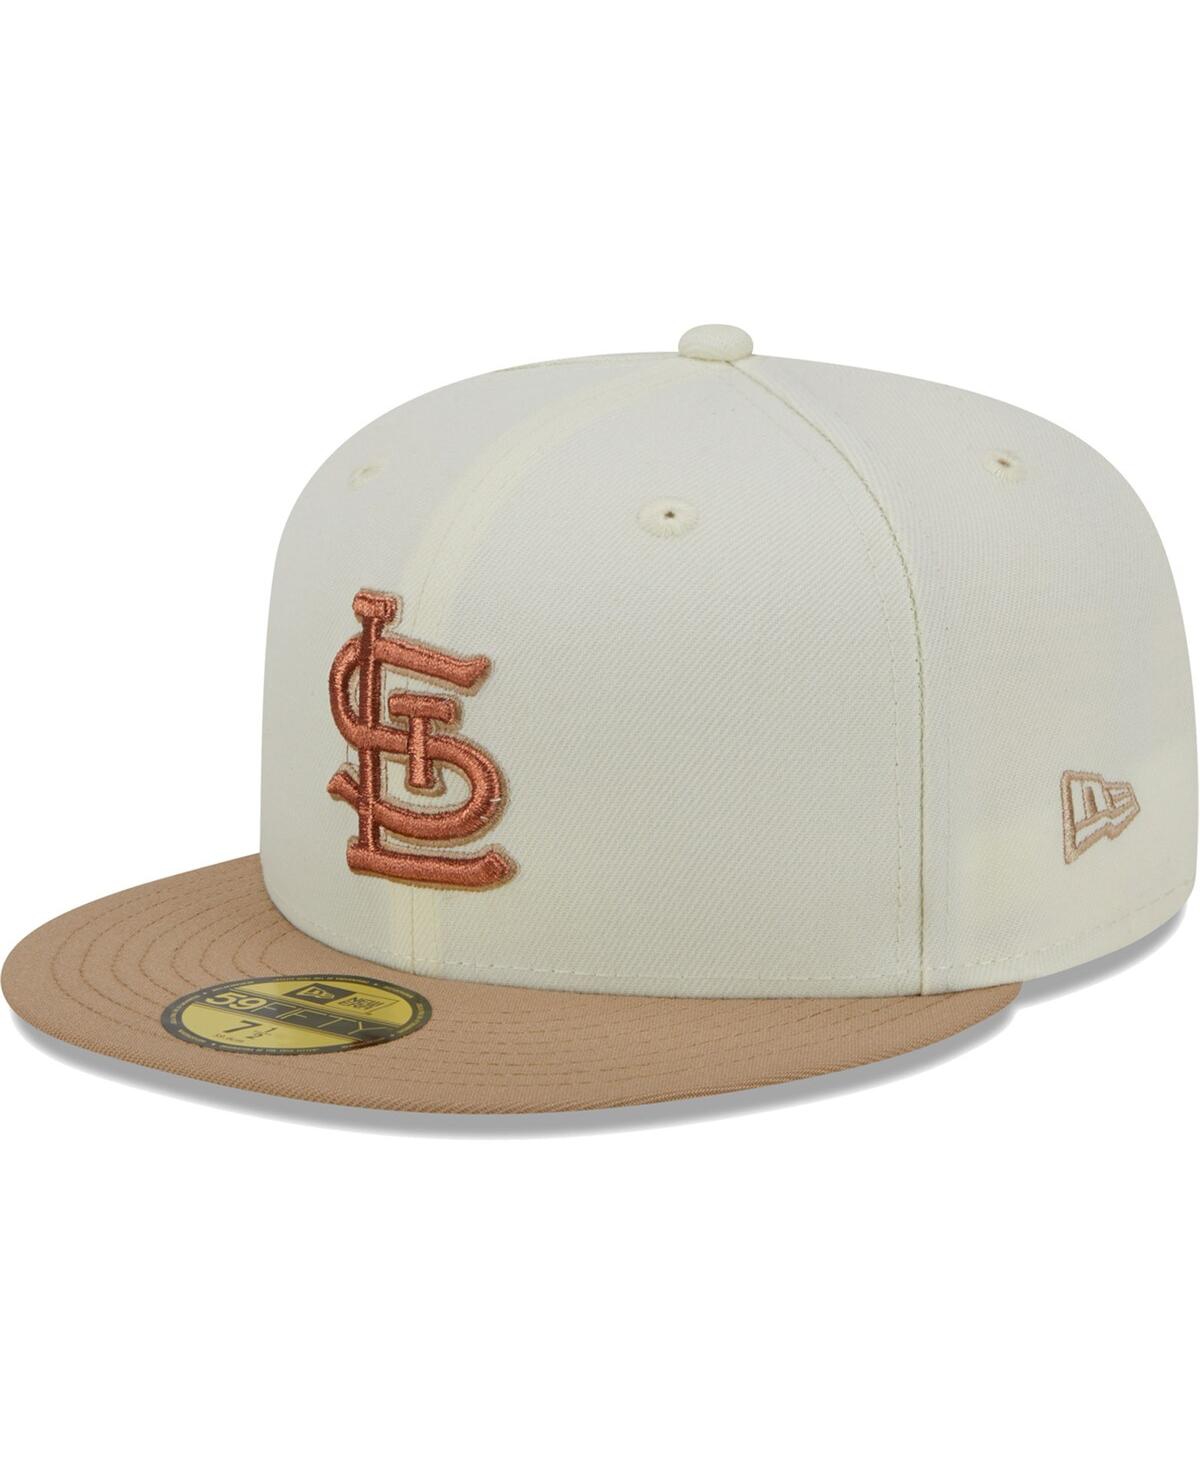 Colorado Rockies New Era 20th Anniversary Chrome Alternate Undervisor  59FIFTY Fitted Hat - Cream